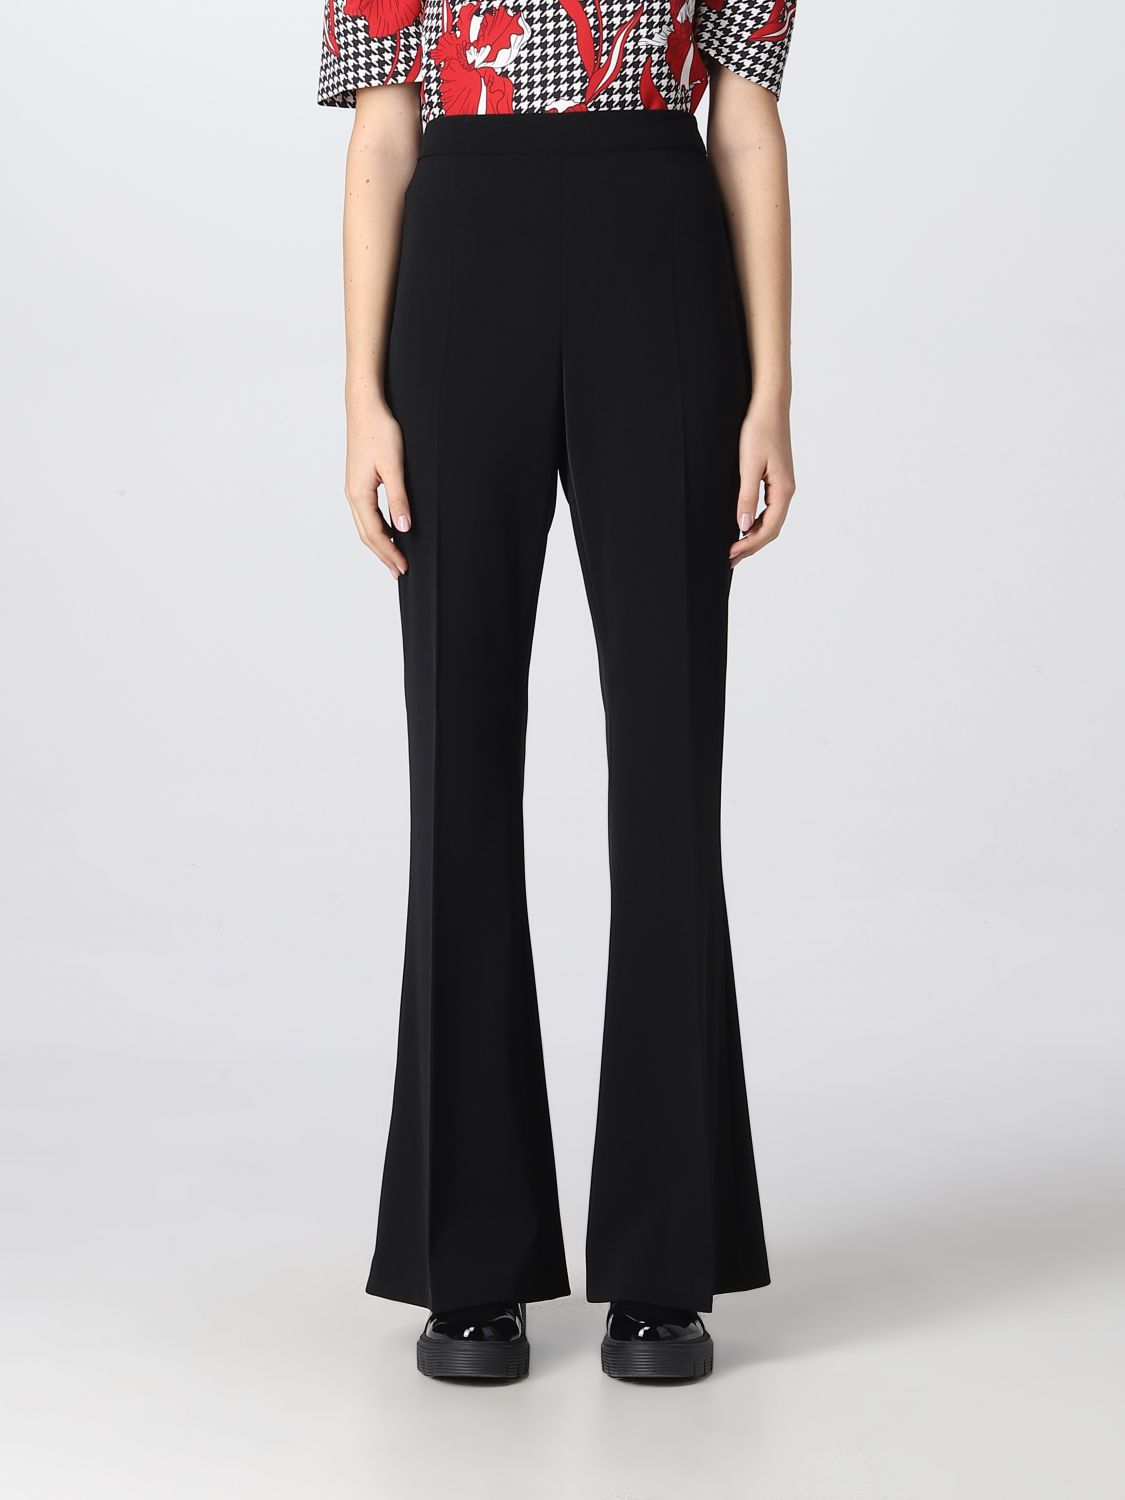 Trousers Boutique Moschino: Boutique Moschino trousers for women black 1